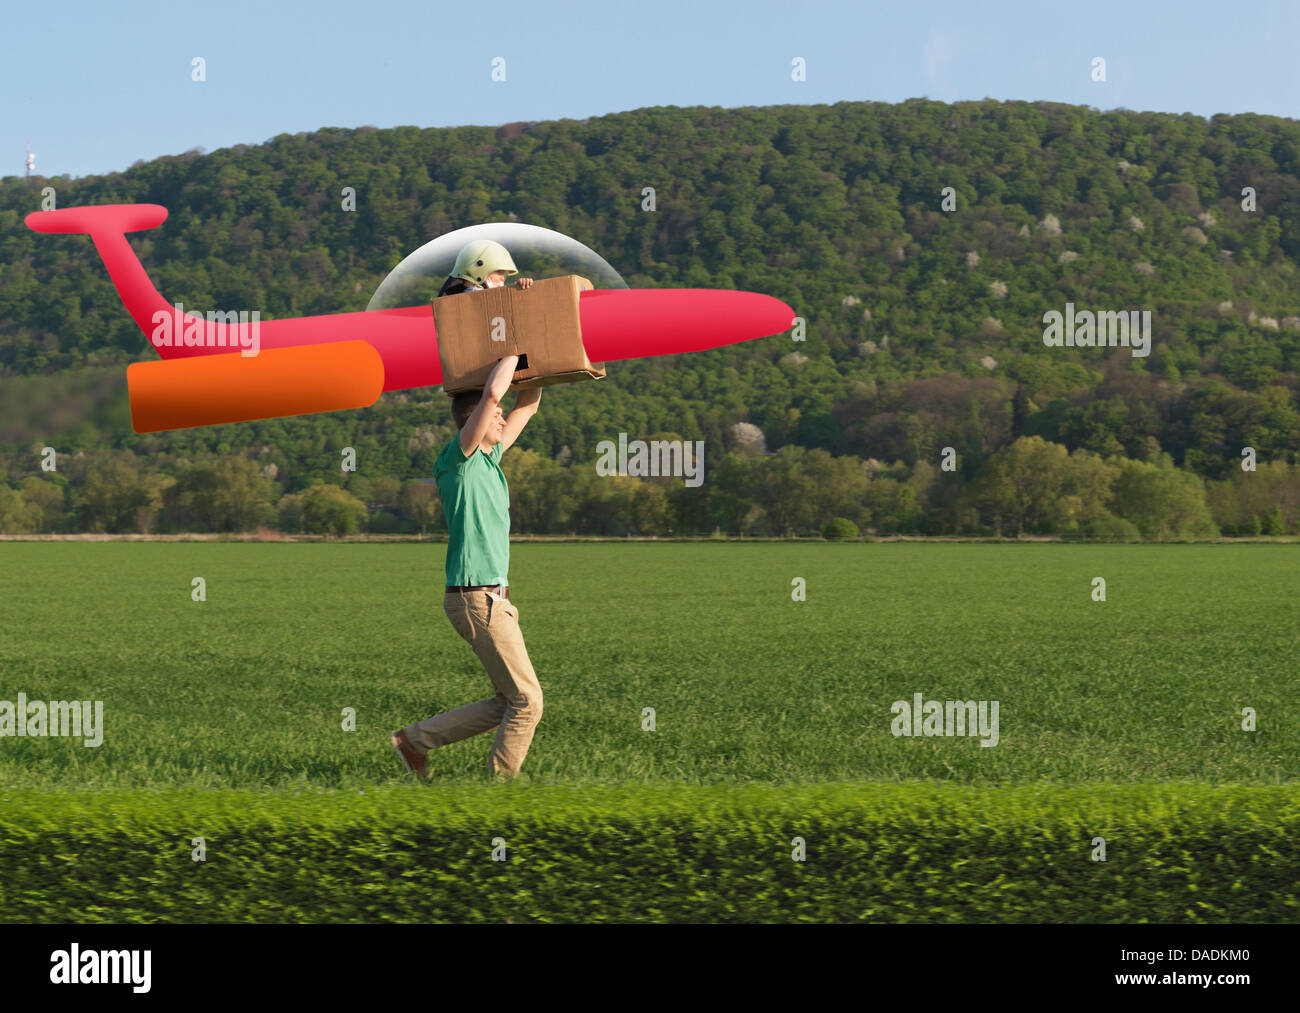 Man running with child in model airplane across field Stock Photo